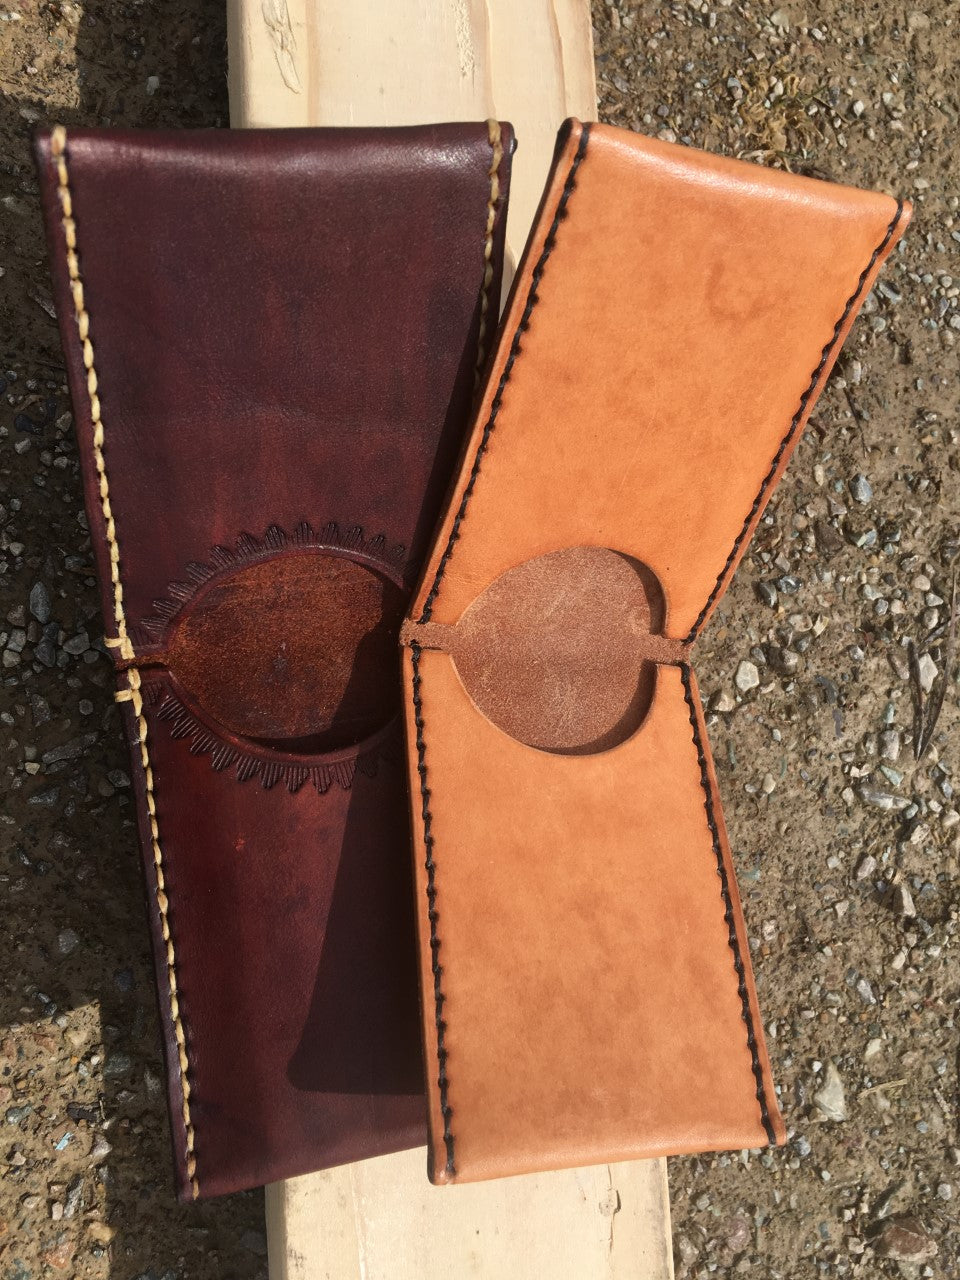 Similar to Bifold Twin but flipped a bit.  Sleeves are in a vertical orientation. You like?  Same bomber stitching and full grain leather. Waxed finish. Veg tan. 3.5